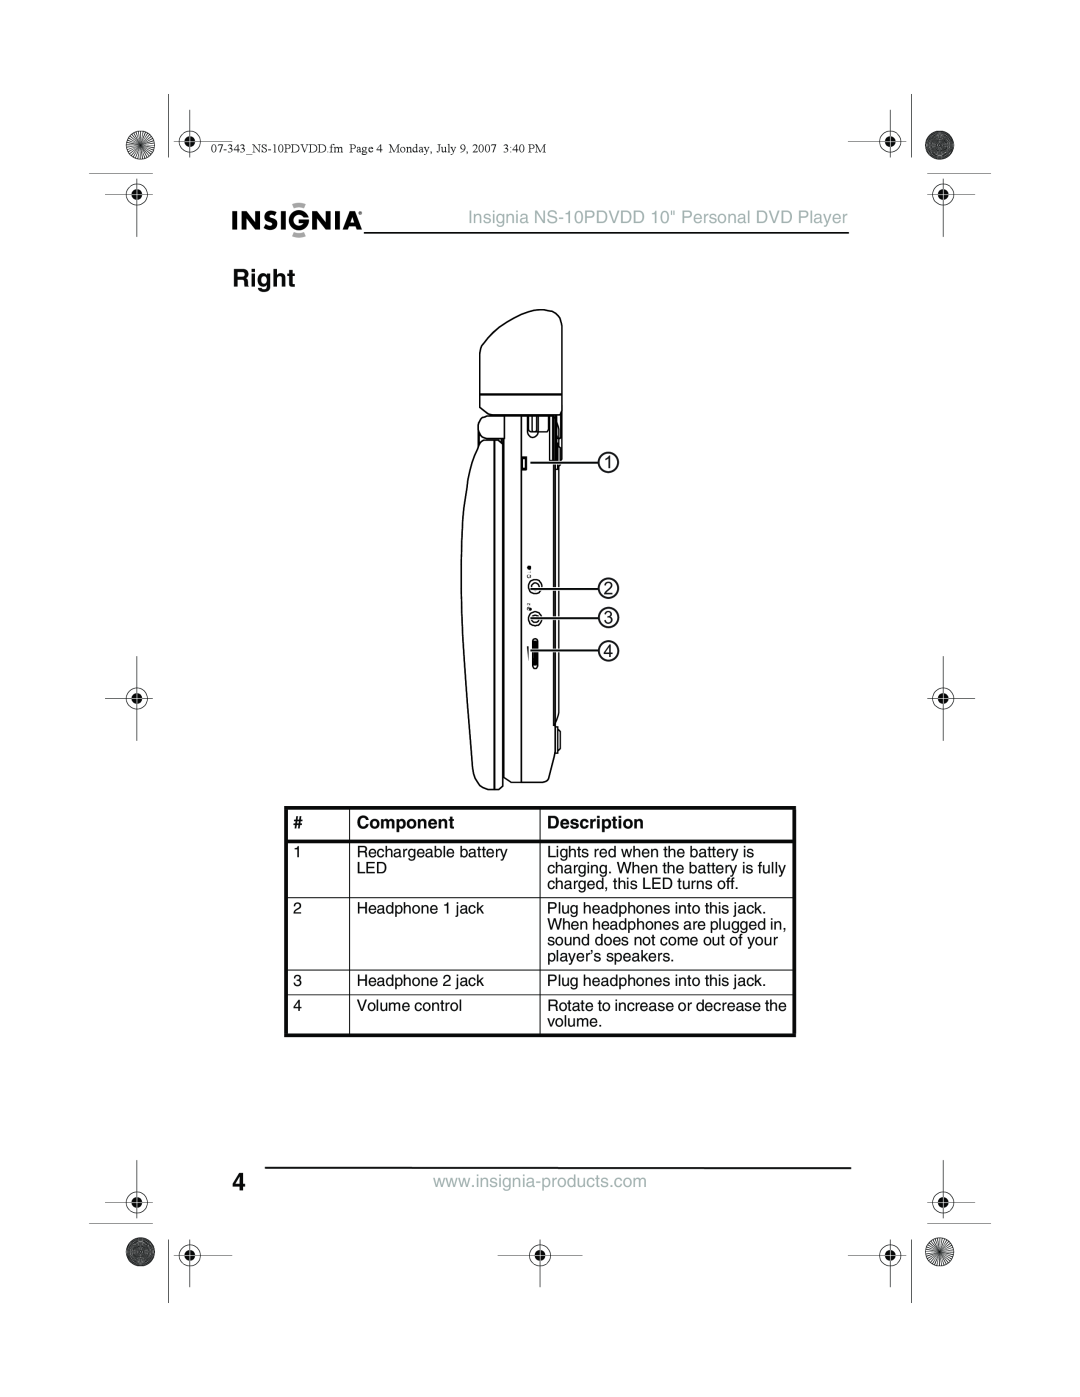 Insignia Right, Insignia NS-10PDVDD 10 Personal DVD Player, Component, Description, When headphones are plugged in 